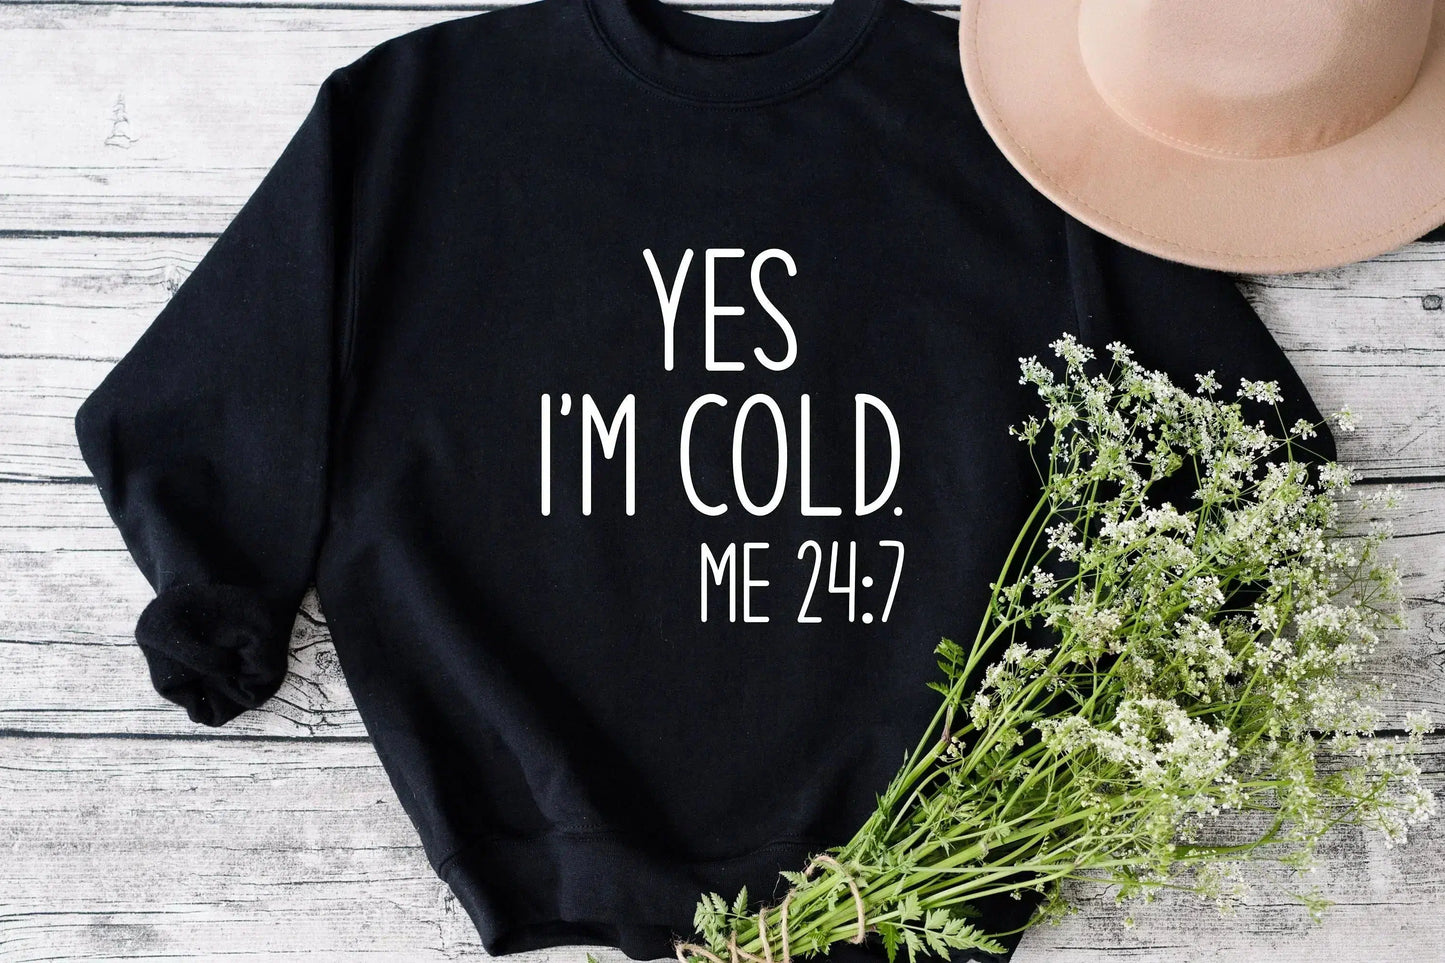 I'm Cold 24/7, Christmas T-shirt for Women, Funny Winter Shirt, Christmas Tee, Holiday Shirt, Women's Christmas, Holiday Shirt HMDesignStudioUS